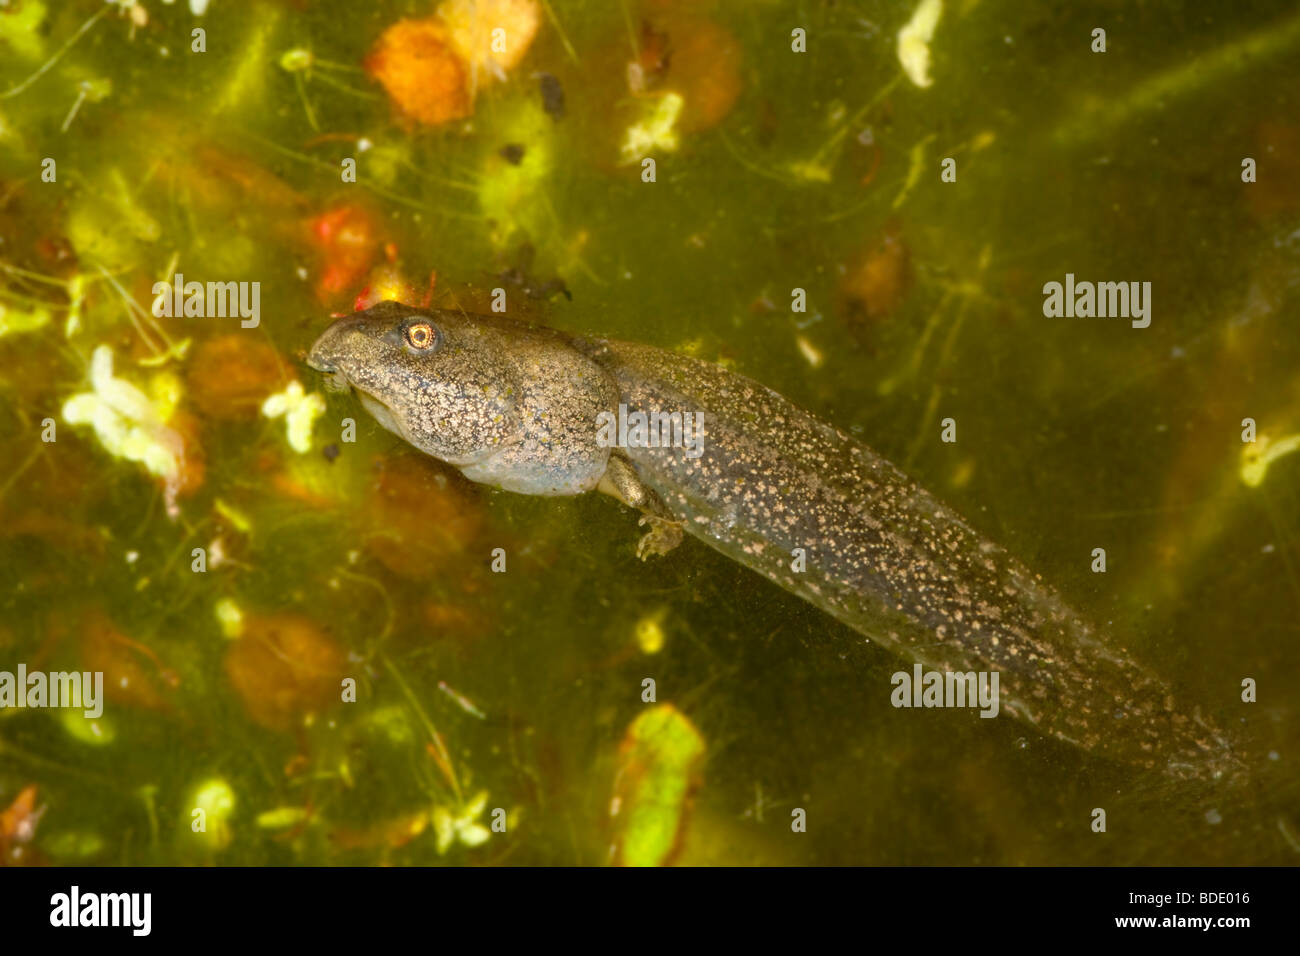 Tadpole with two legs Stock Photo